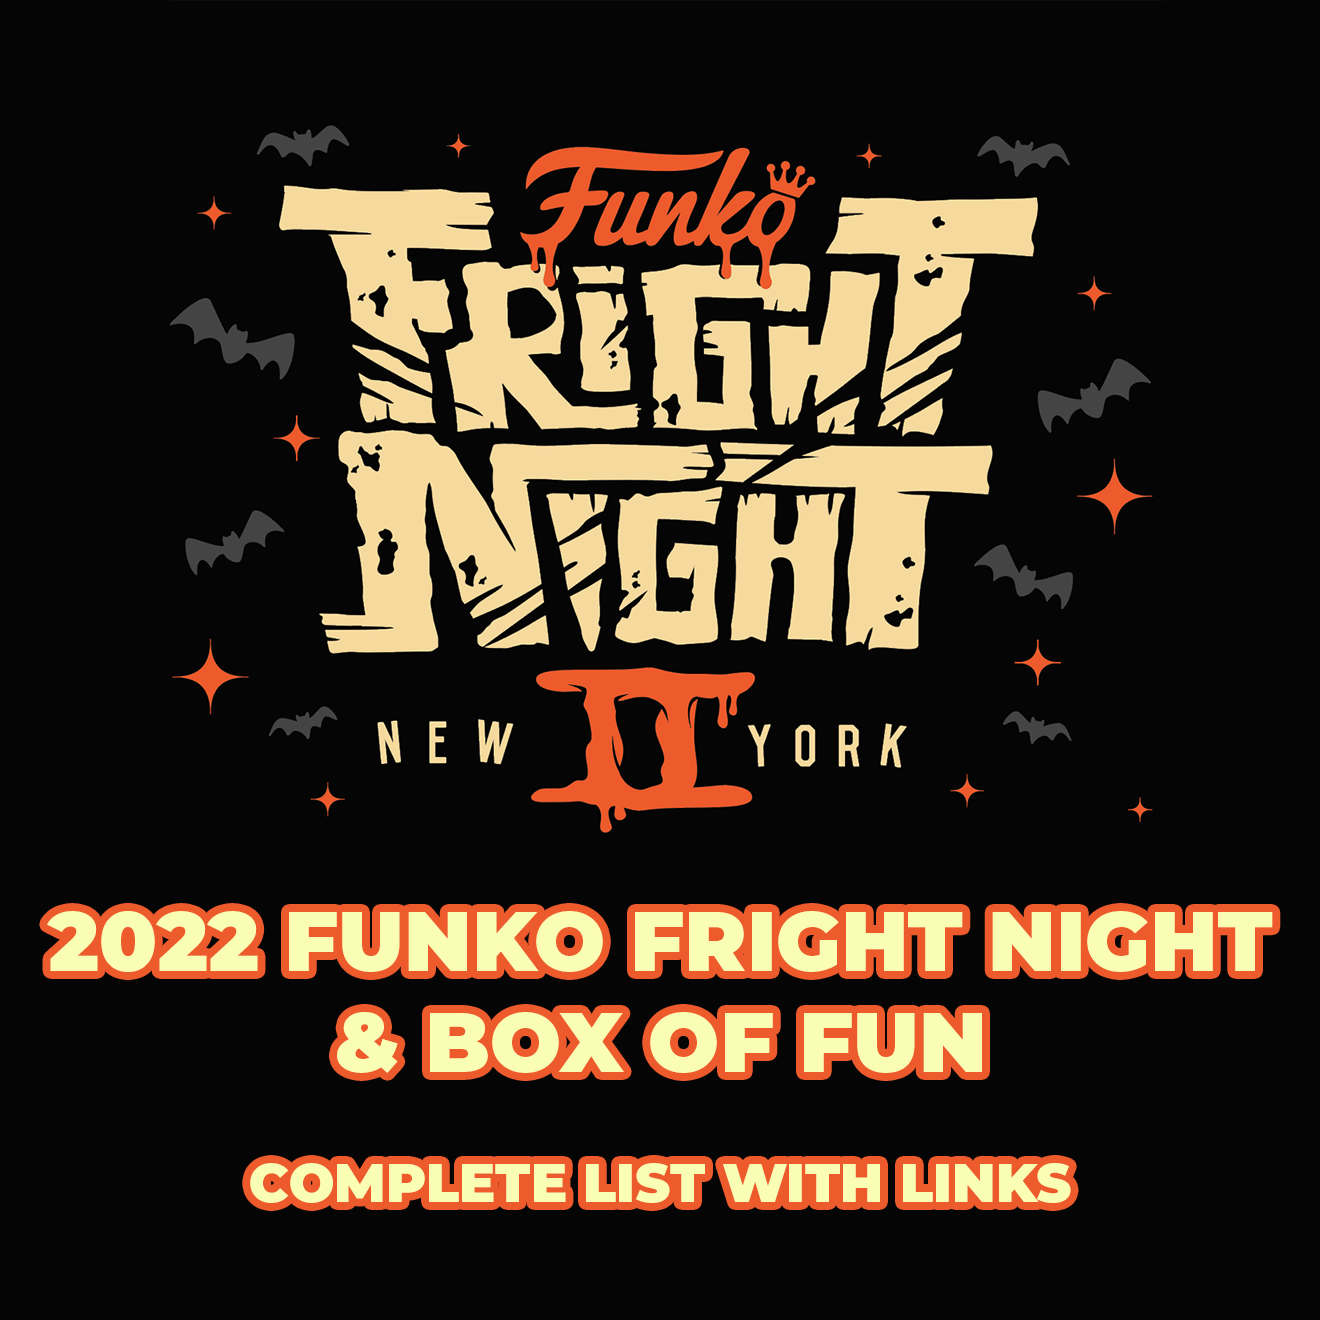 NYCC 2022 Funko Fright Night Box of Fun Fundays Complete List with Links eBay Display Geek